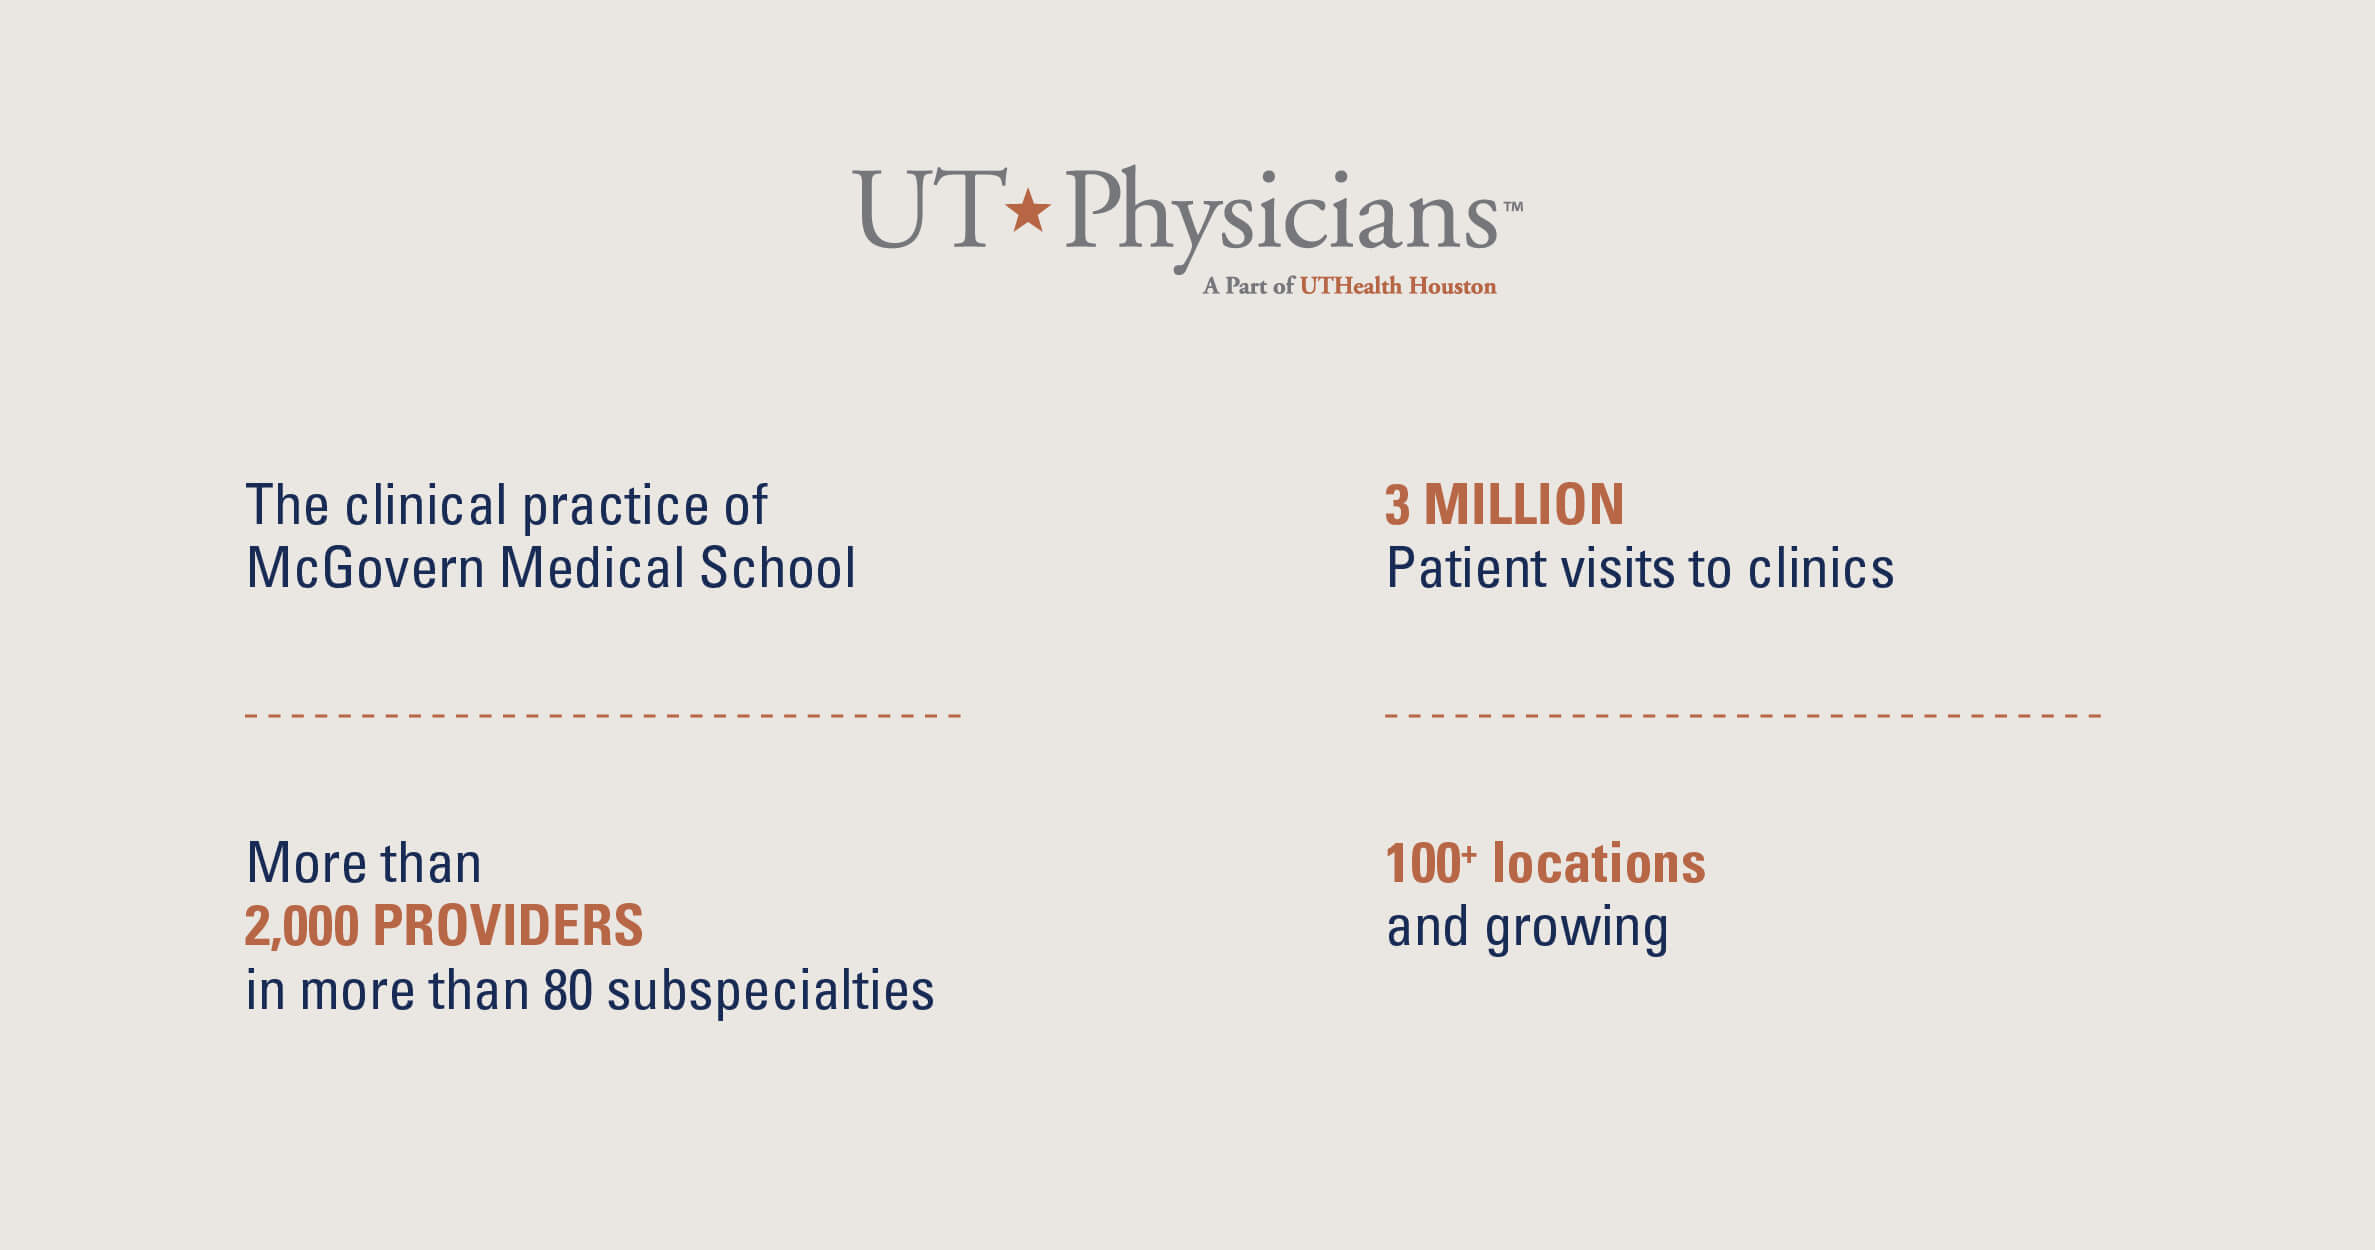 Statistics describing UTPhysicians as the clinical practice of McGovern Medical School with more than 2,000 providers and 100 locations